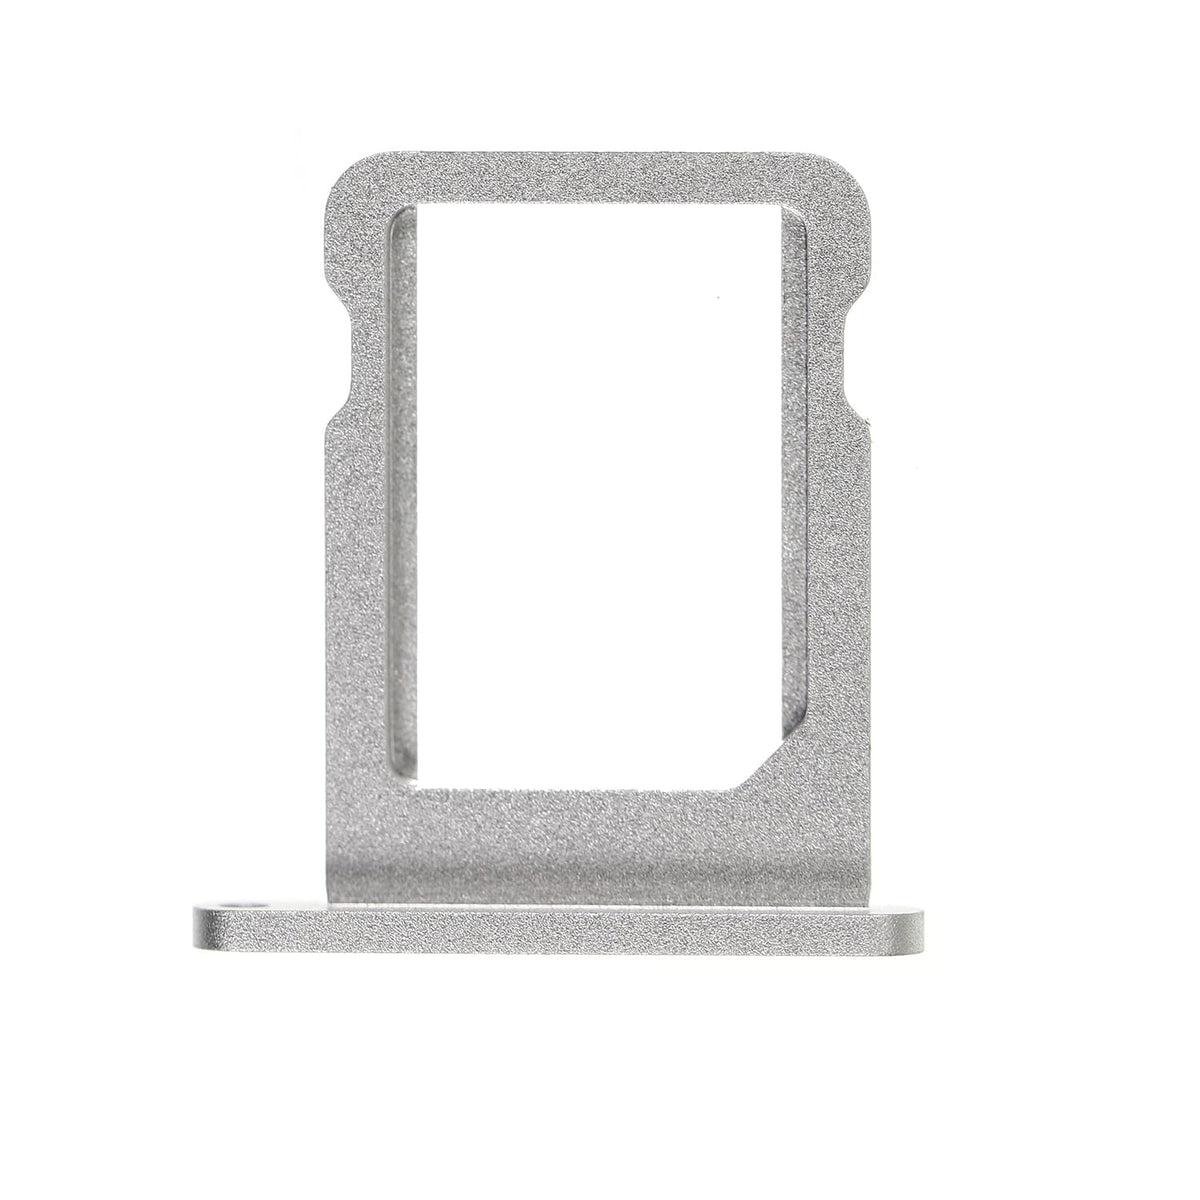 SIM CARD TRAY FOR IPAD PRO 11 3RD - SILVER